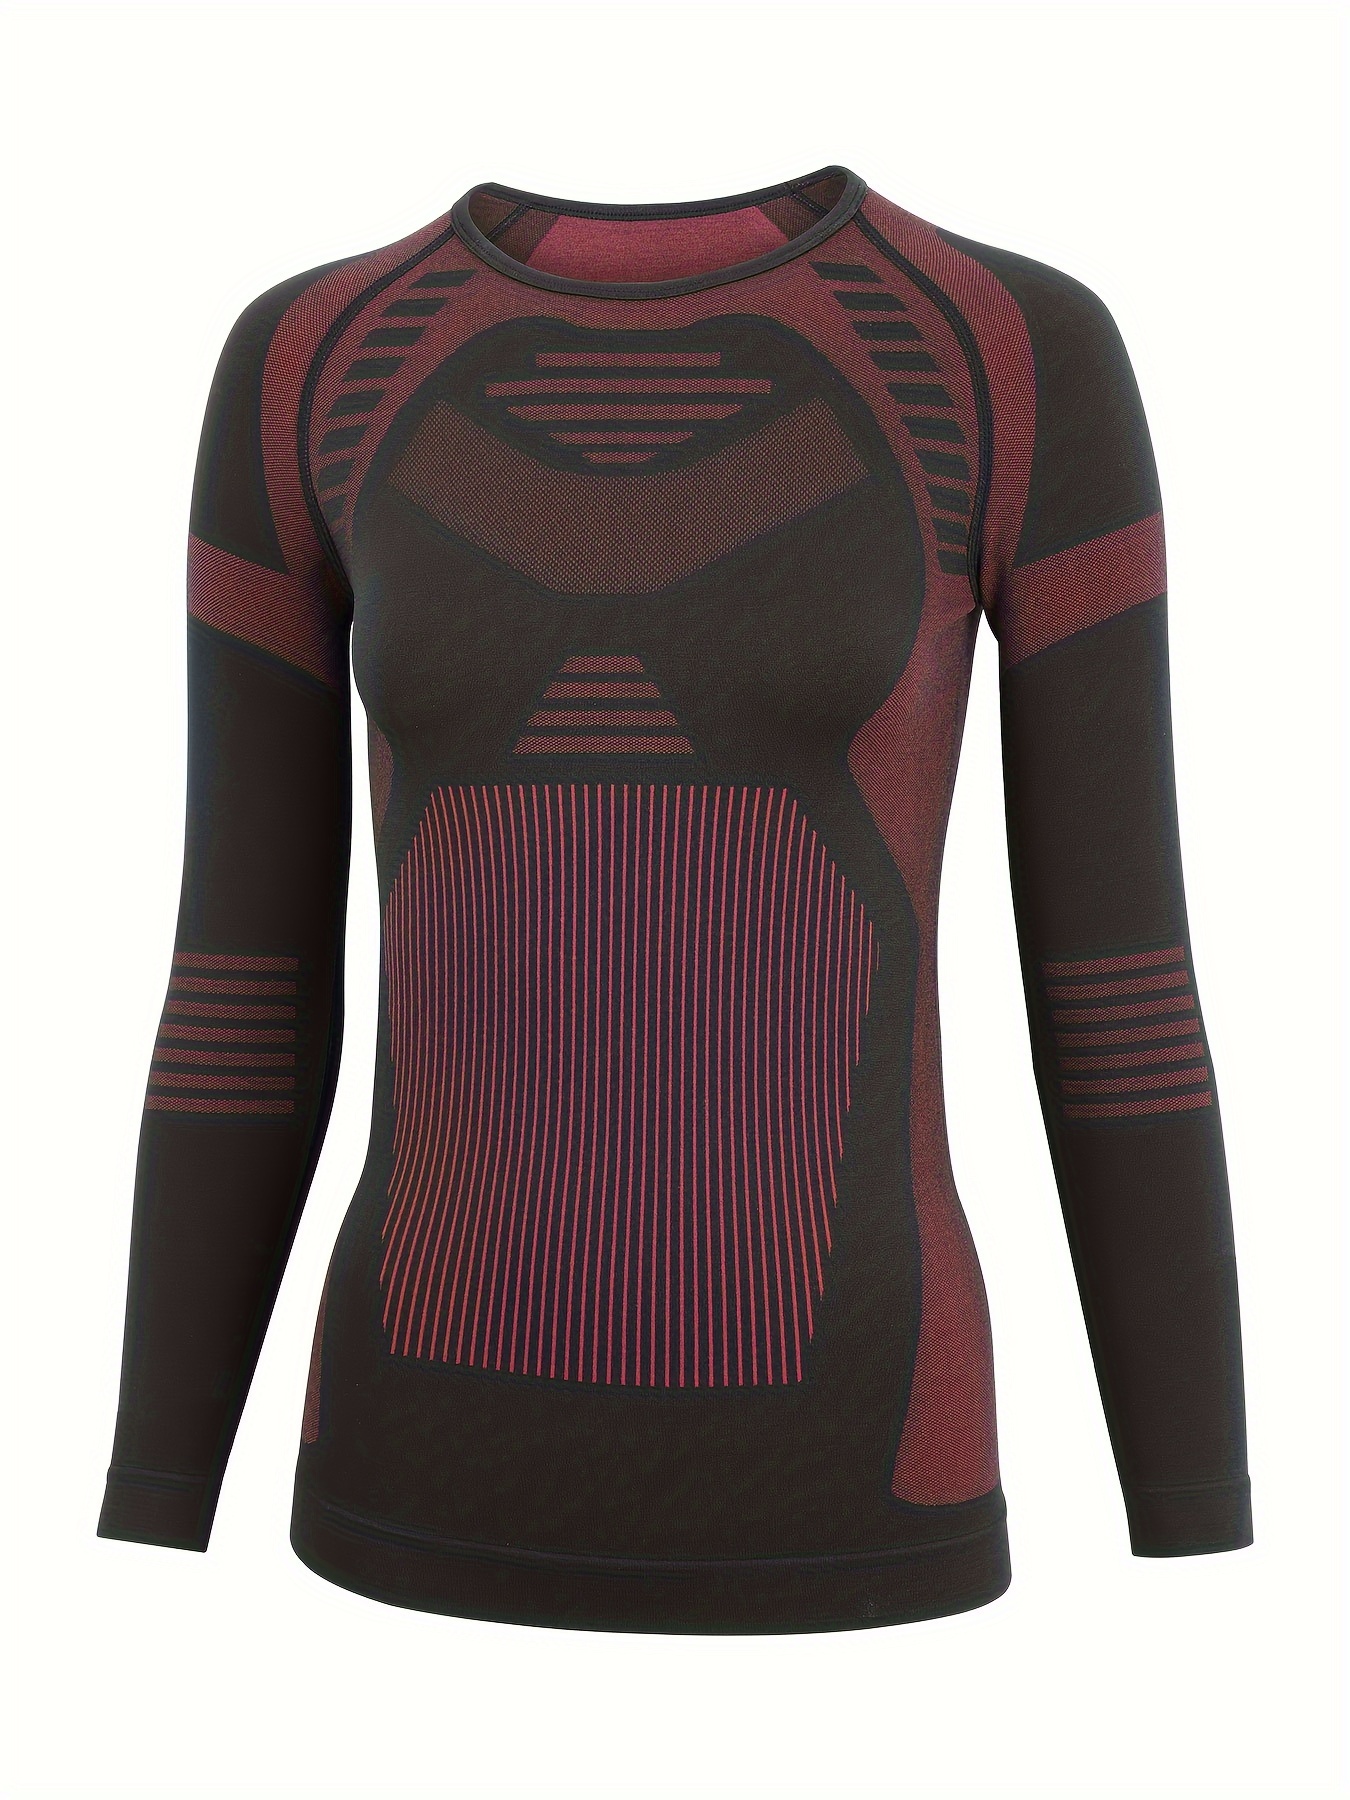 Under Armour Long Sleeve Thermal Underwear for Women